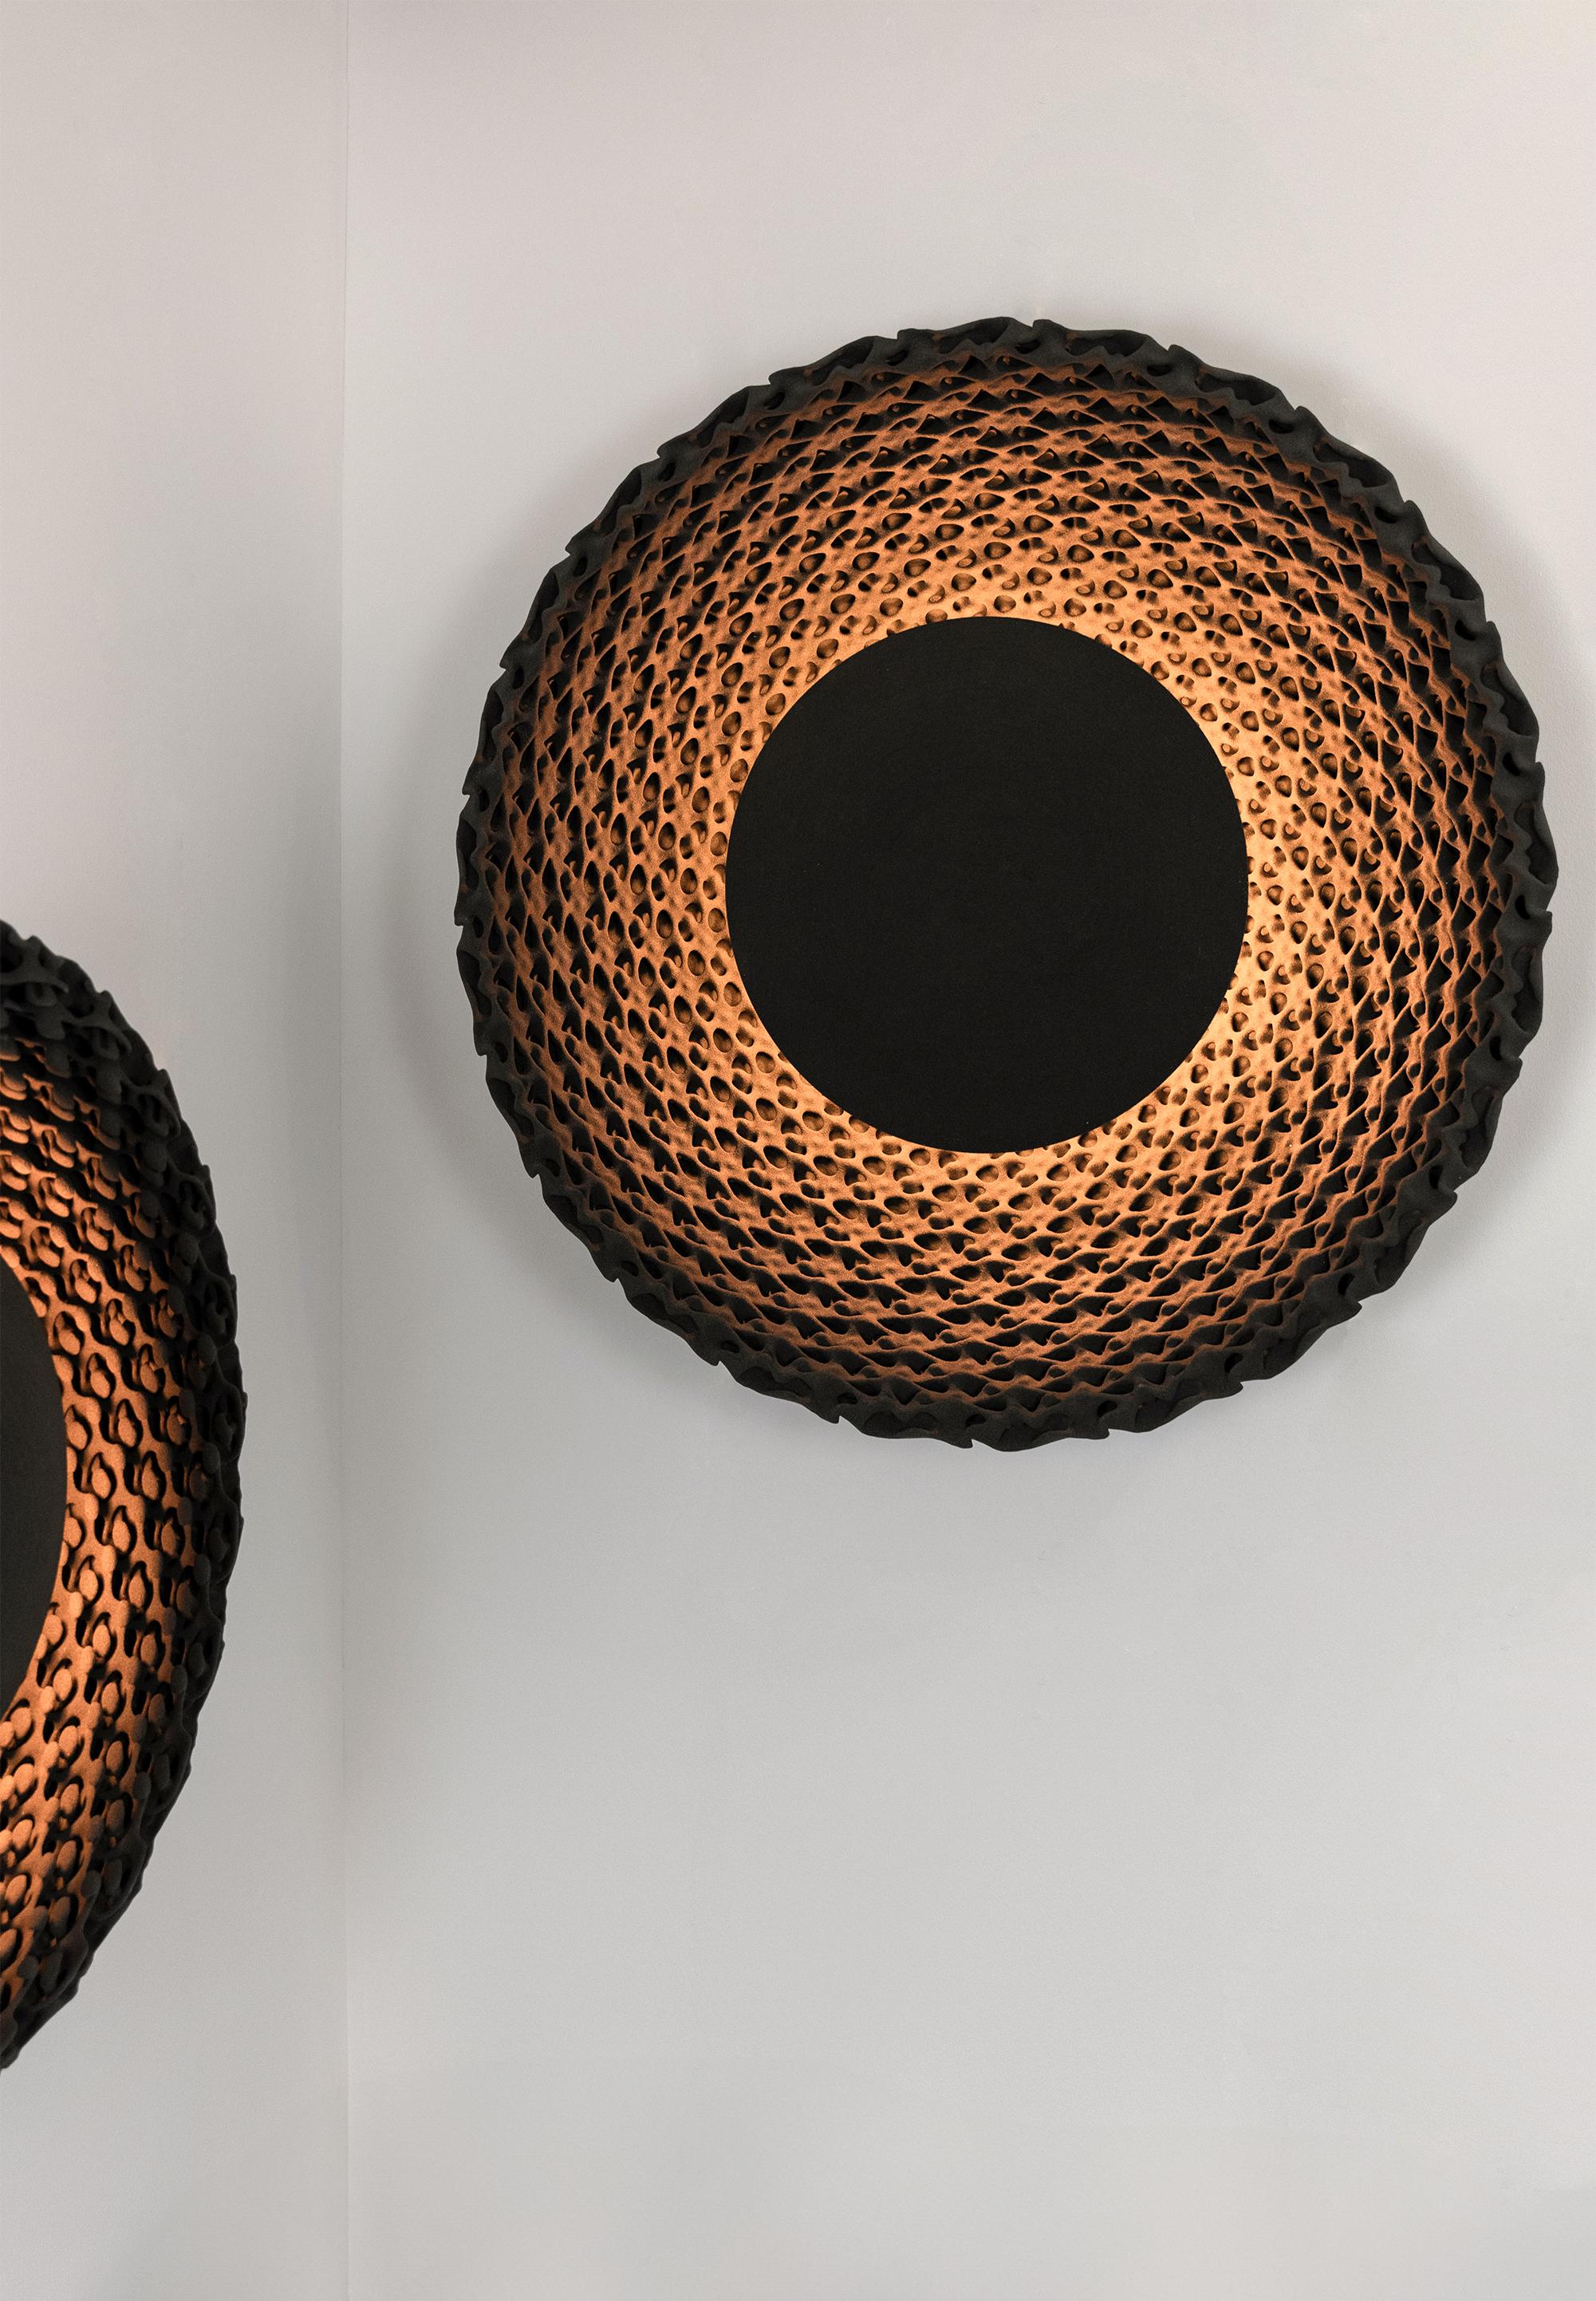 Dutch Sun Wall Lamp, 3D-Printed Sand, Sculptural Organic, Ambient Mood Lighting For Sale